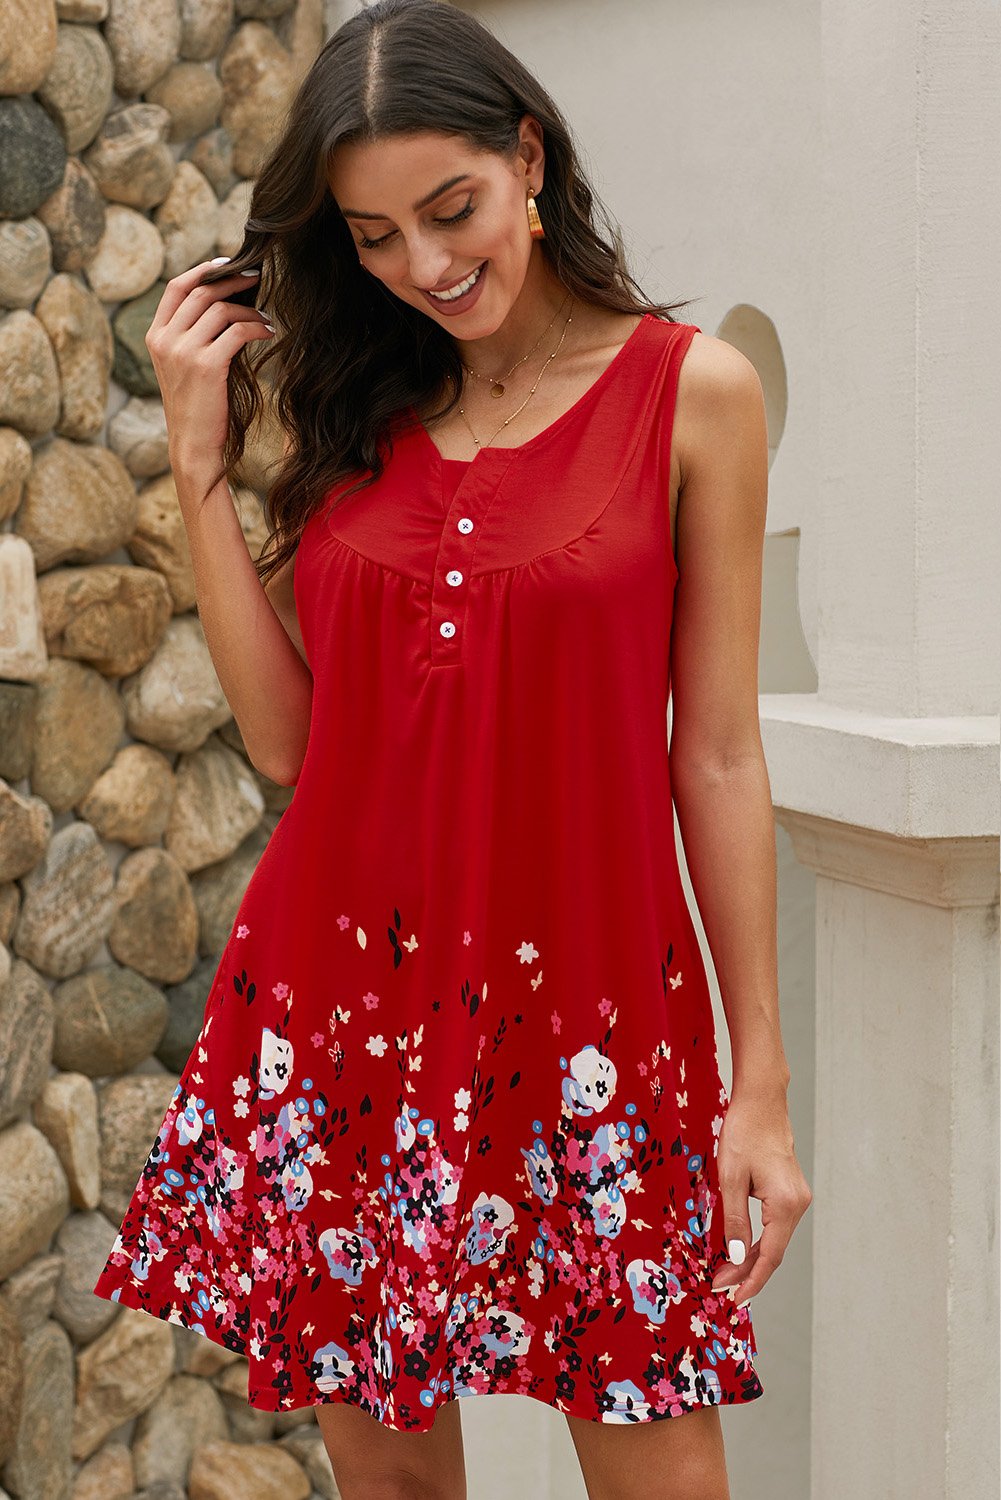 Red Crew Neck A-Line Daily Beach Floral Dress